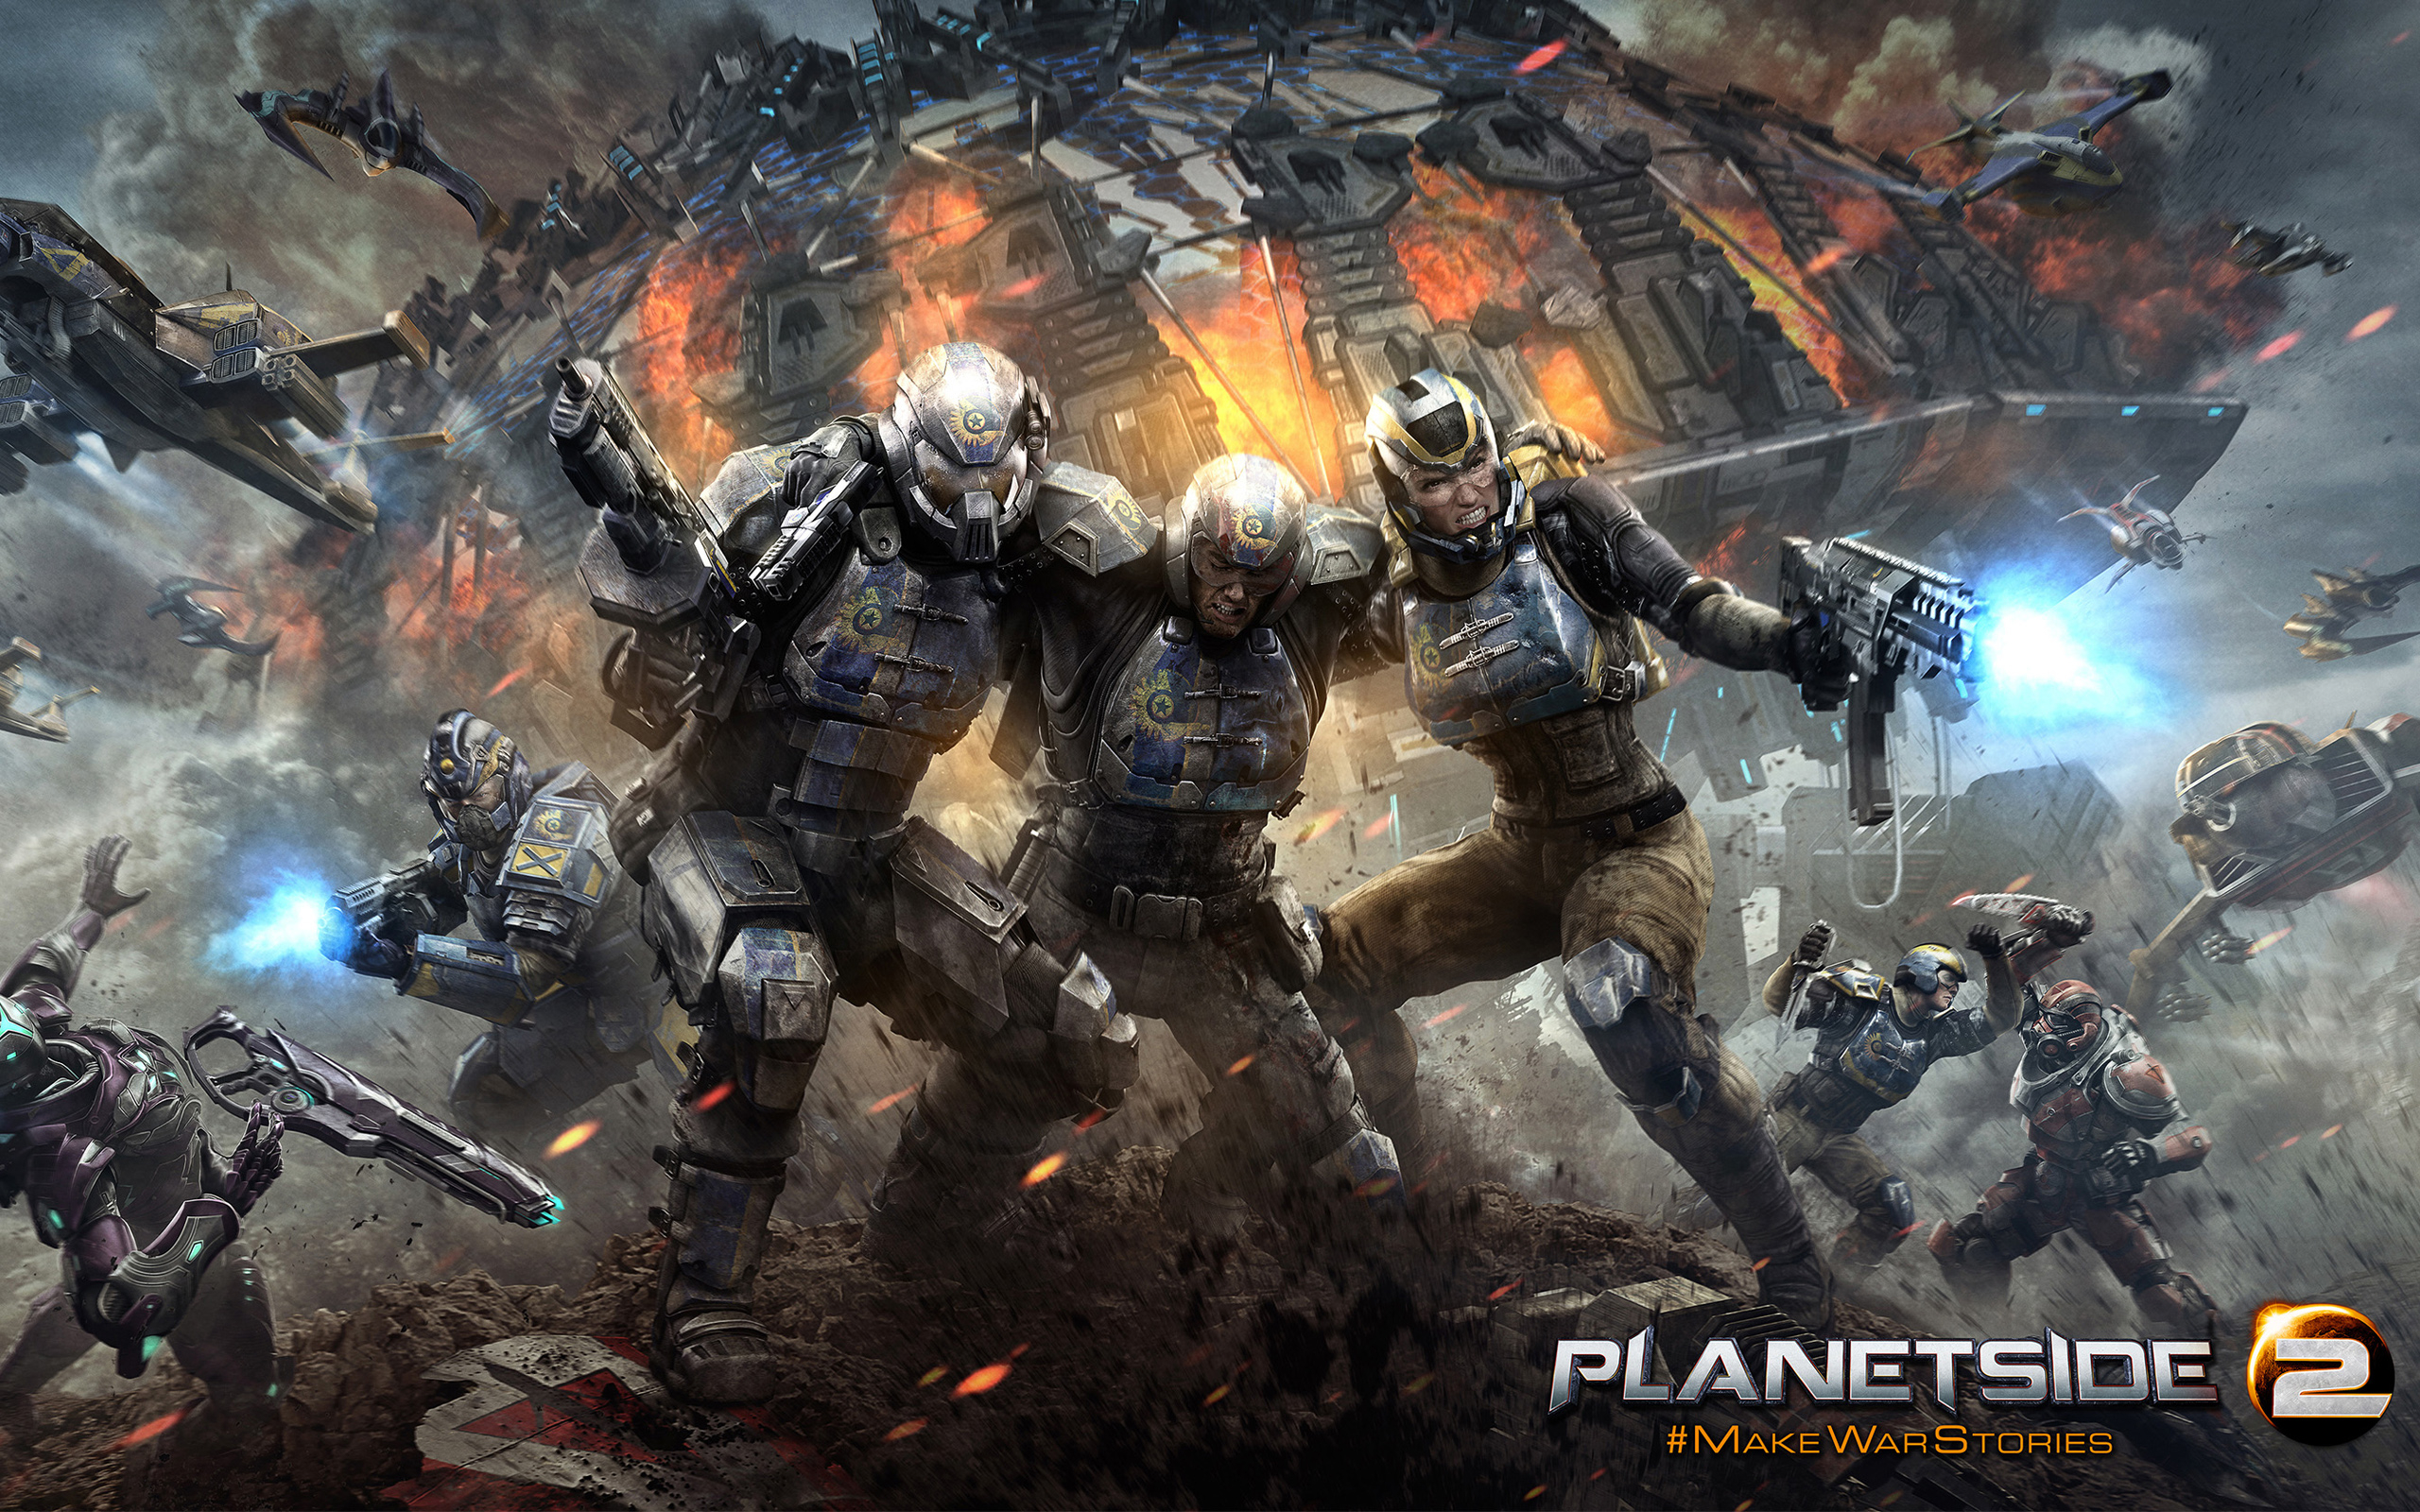 2560x1600 30+ Planetside 2 HD Wallpapers and Backgrounds